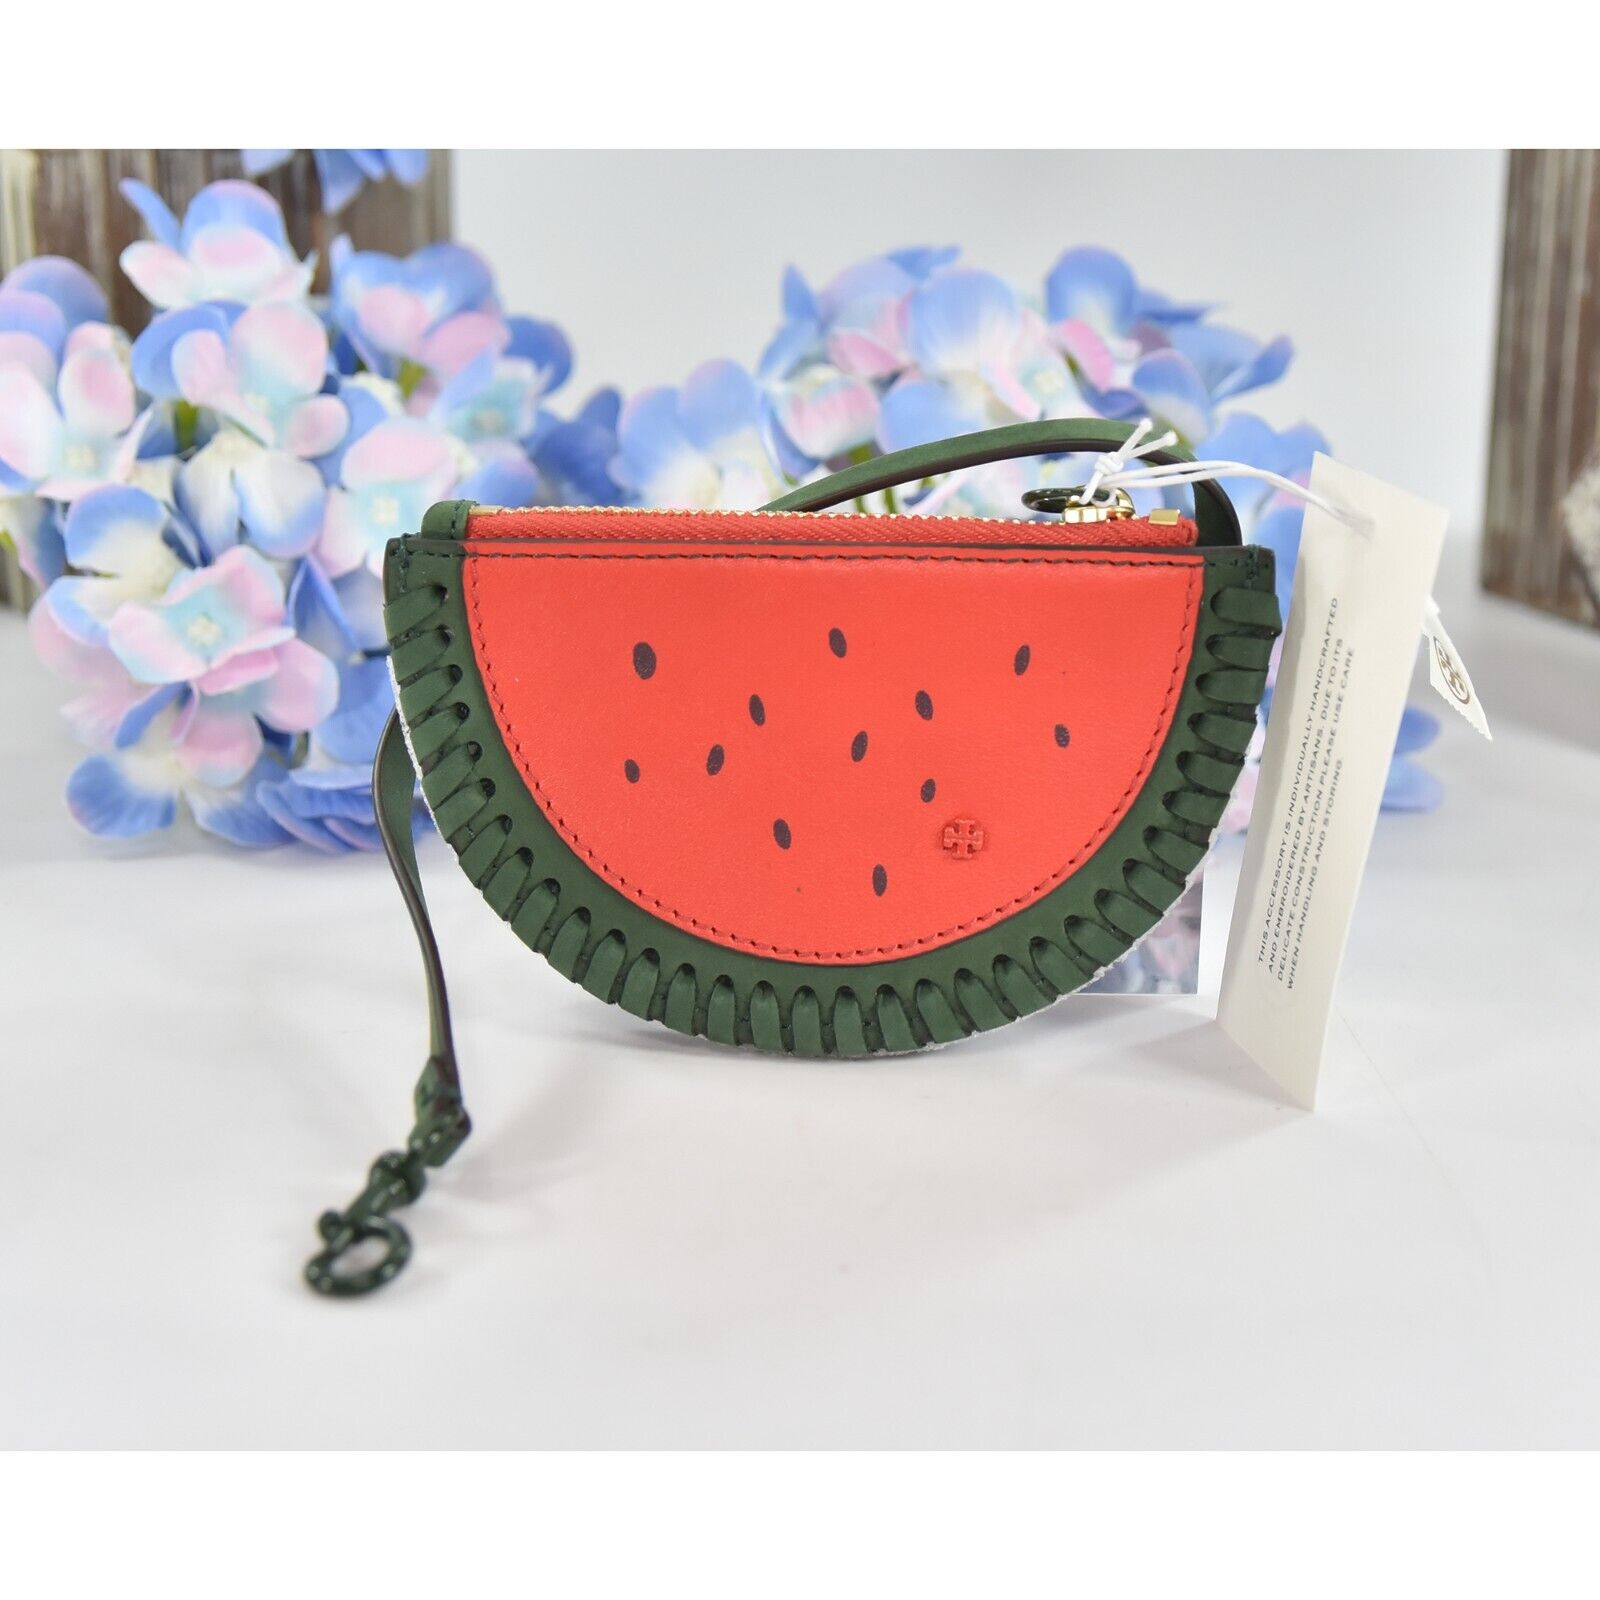 6509 Watermelon small Hot Water Bag with Cover for Pain Relief, Neck,  Shoulder Pain and Hand, Feet Warmer, Menstrual Cramps., Water Bags, हॉट  वॉटर बॅग - myhomeify.com, Delhi | ID: 2851718863673